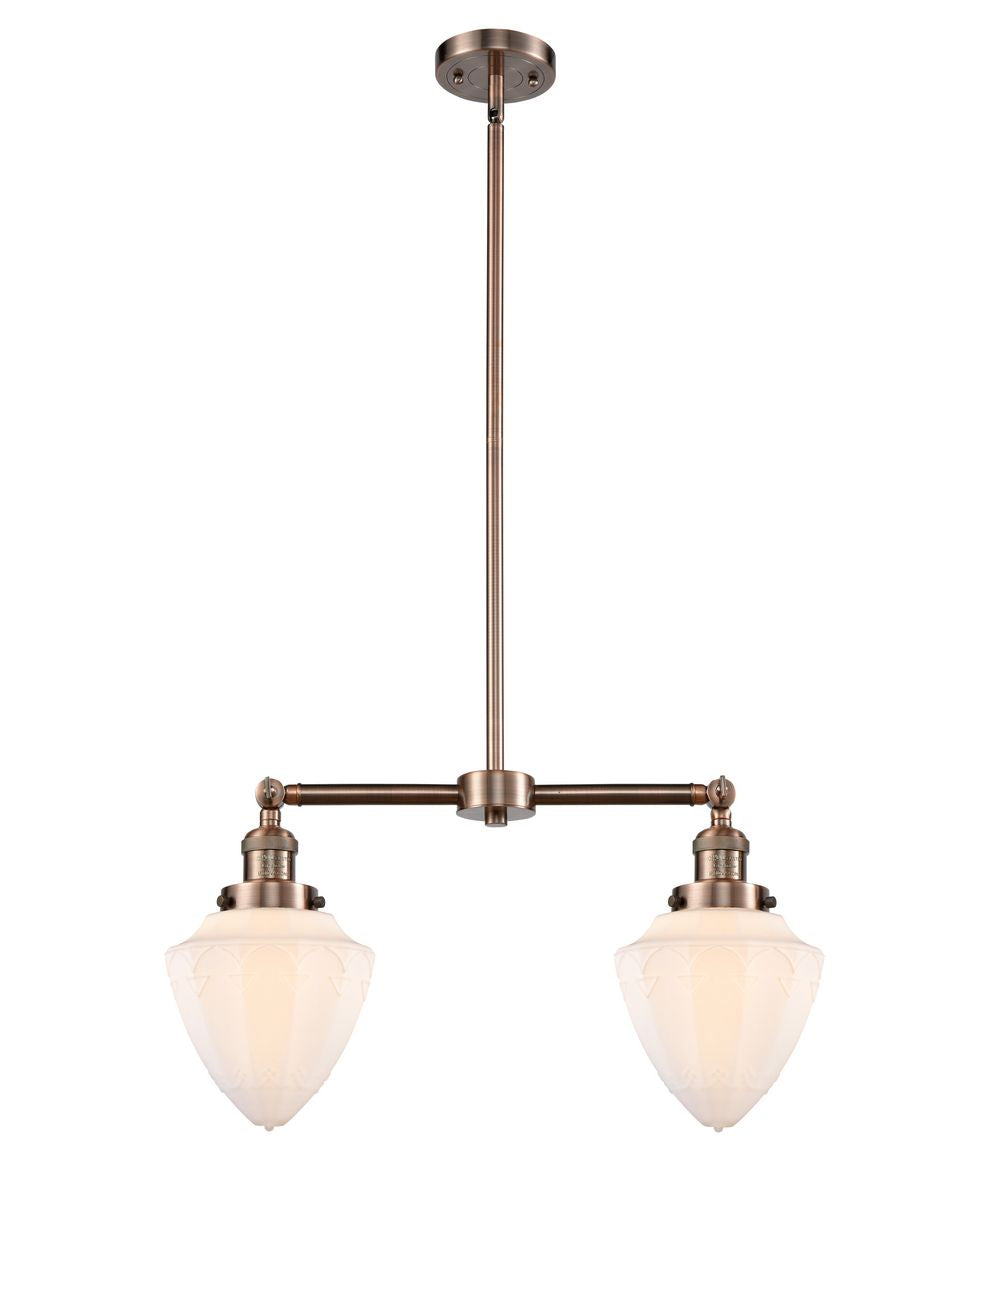 209-AC-G661-7 2-Light 24" Antique Copper Island Light - Matte White Cased Small Bullet Glass - LED Bulb - Dimmensions: 24 x 7 x 15.25<br>Minimum Height : 24.25<br>Maximum Height : 48.25 - Sloped Ceiling Compatible: Yes